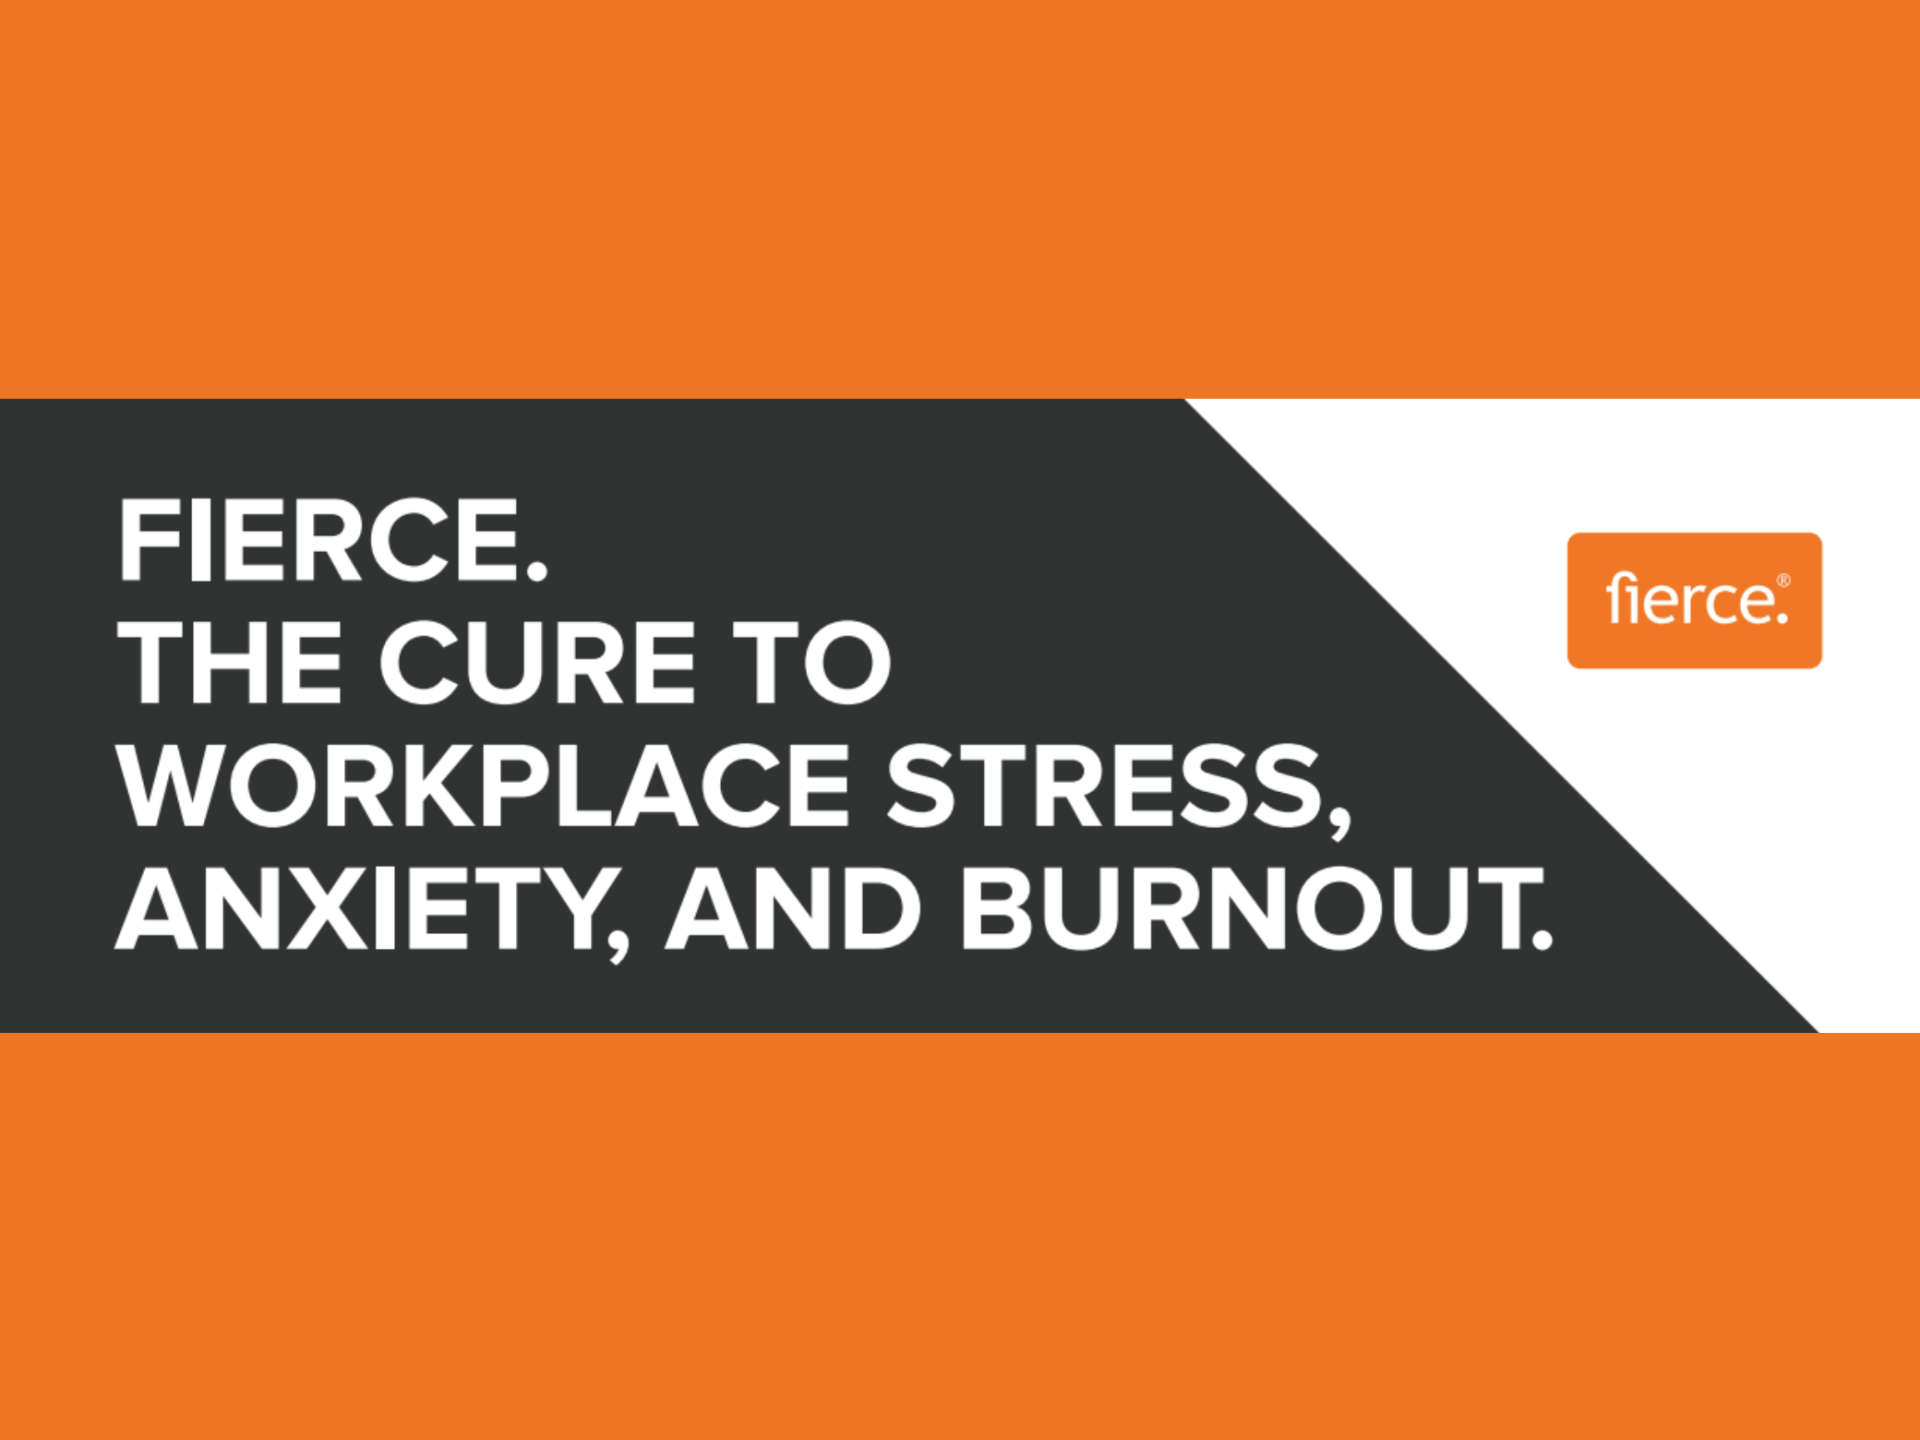 FIERCE. THE CURE TO WORKPLACE STRESS, ANXIETY, AND BURNOUT